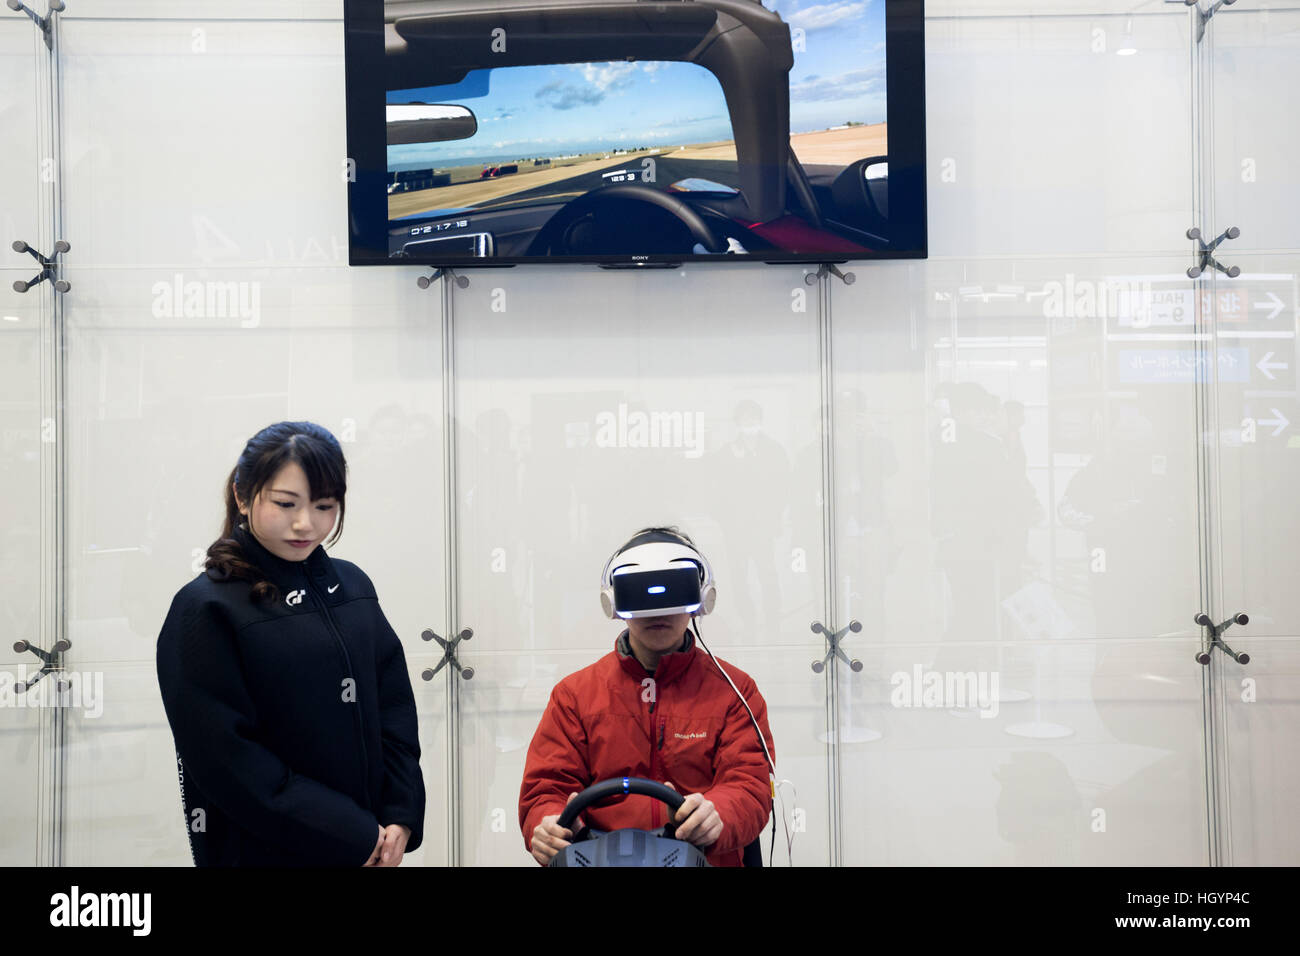 January 13, 2017 - Tokyo, Japan - Sony Interactive Entertainment Japan & Asiaha have Gran Turismo Sport PlayStation VR during the Tokyo Auto Salon 2017. Tokyo Auto Salon is JapanÃ•s largest show for custom cars with 417 automobile-related exhibitors displaying their latest cars, products. (Credit Image: © Alessandro Di Ciommo via ZUMA Wire) Stock Photo